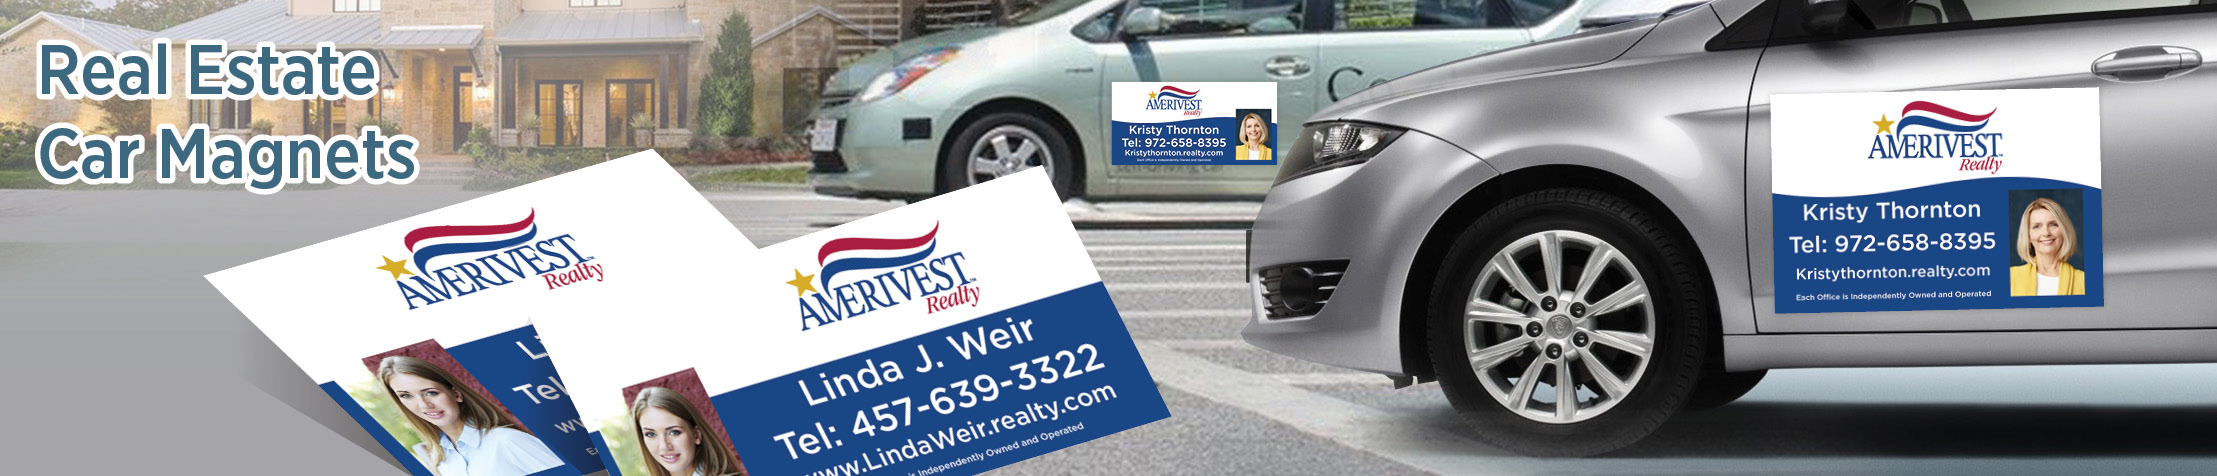 Amerivest Realty Real Estate Car Magnets - Custom car magnets for realtors, with or without photo | BestPrintBuy.com